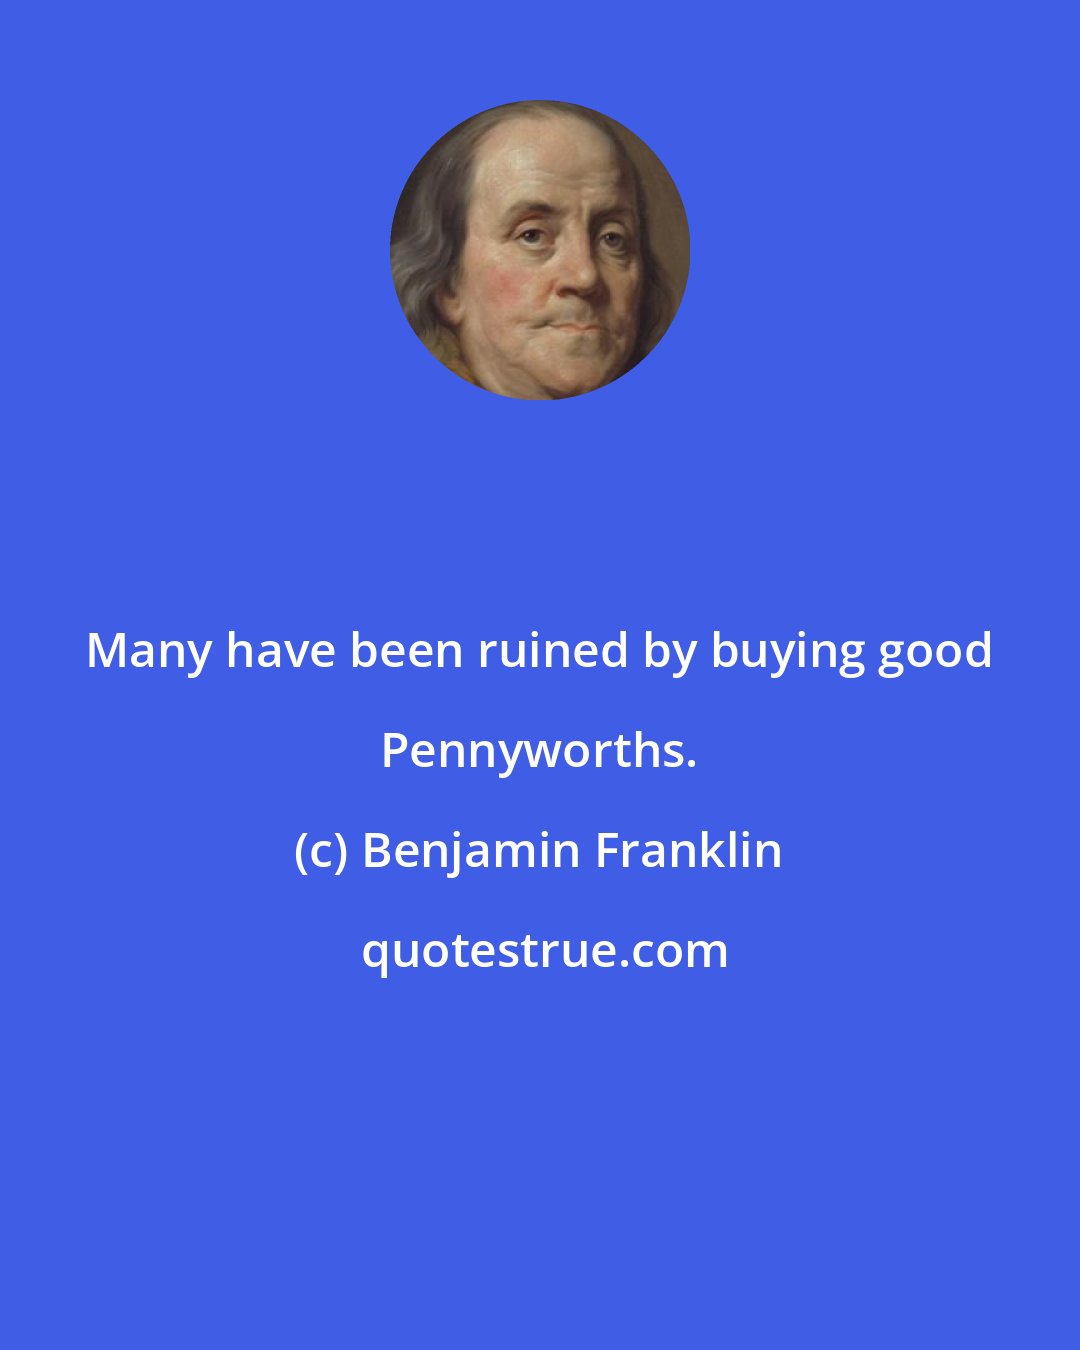 Benjamin Franklin: Many have been ruined by buying good Pennyworths.